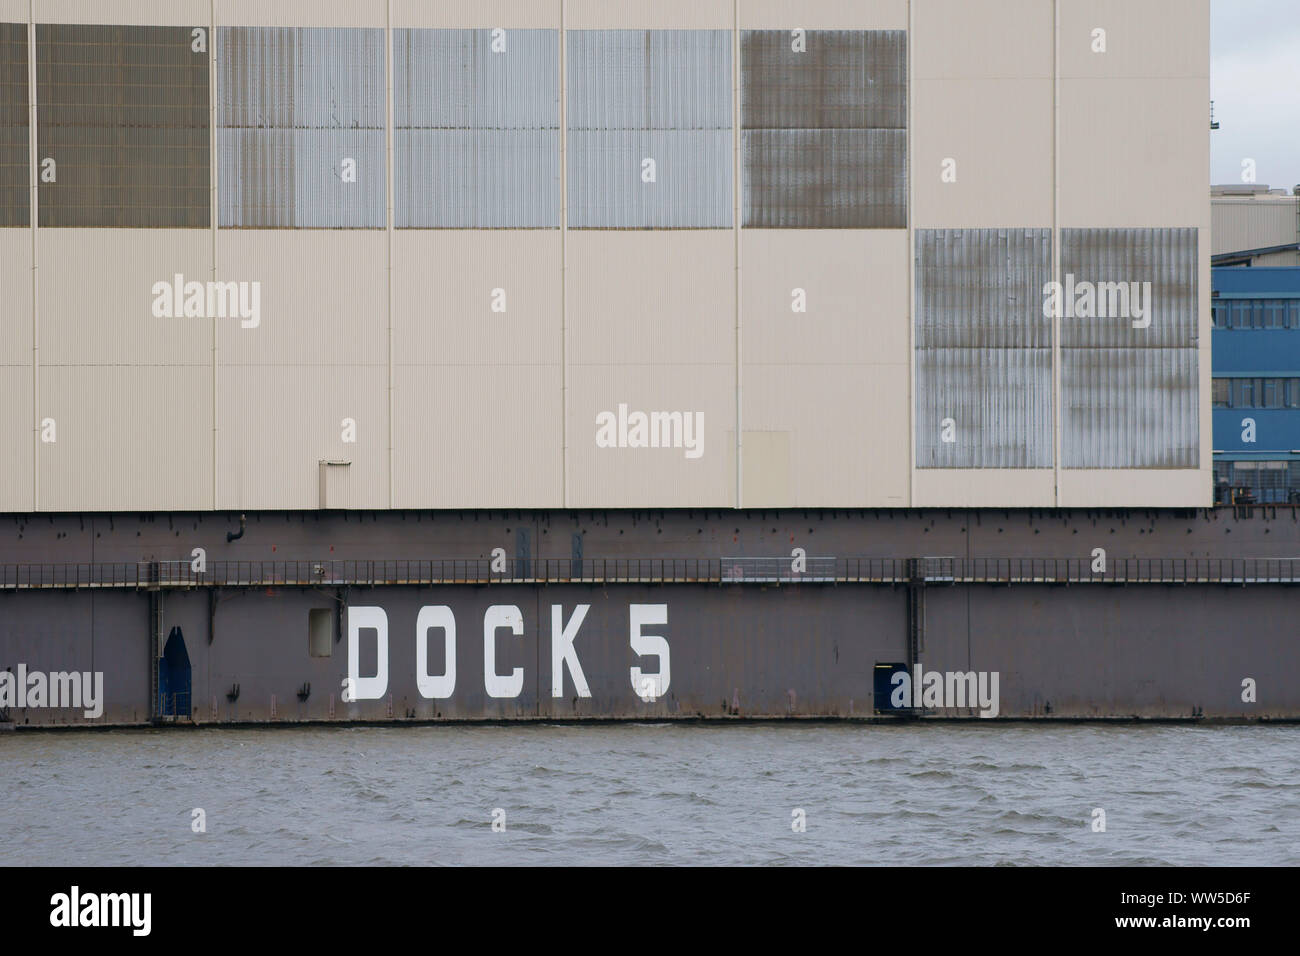 The steel walls and constructions of dock 5 in the Hamburg harbour, Stock Photo